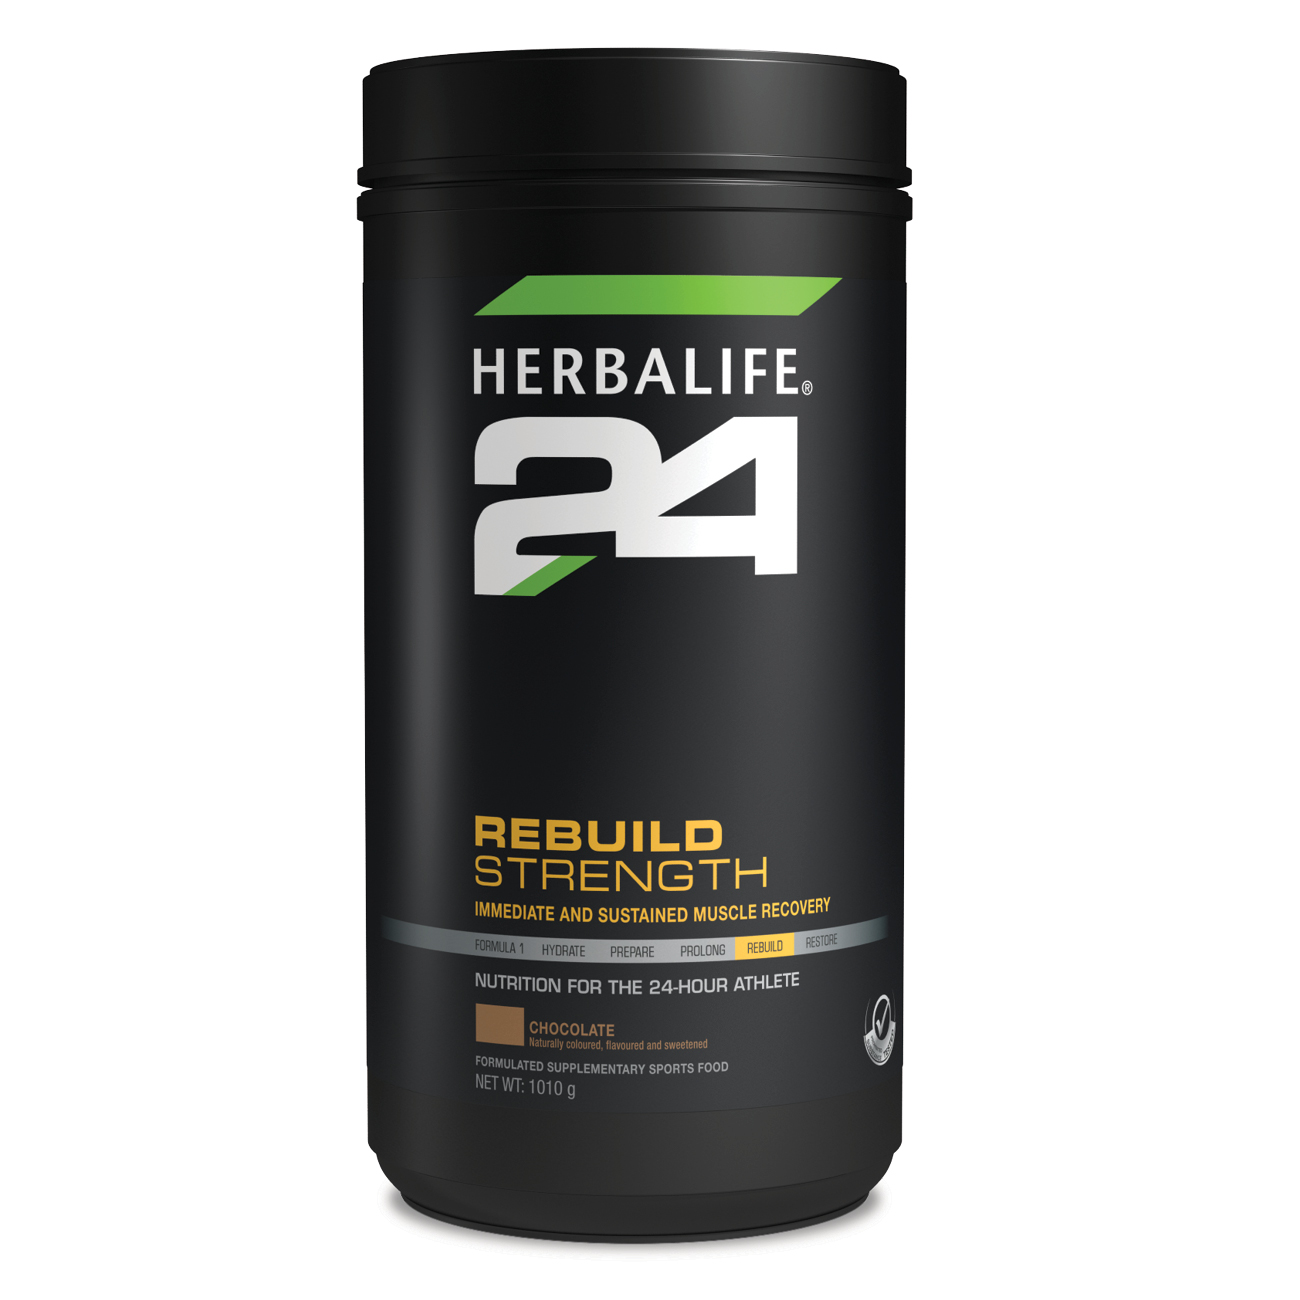 1459 Muscle Recovery Herbalife24 Rebuild Strength Chocolate